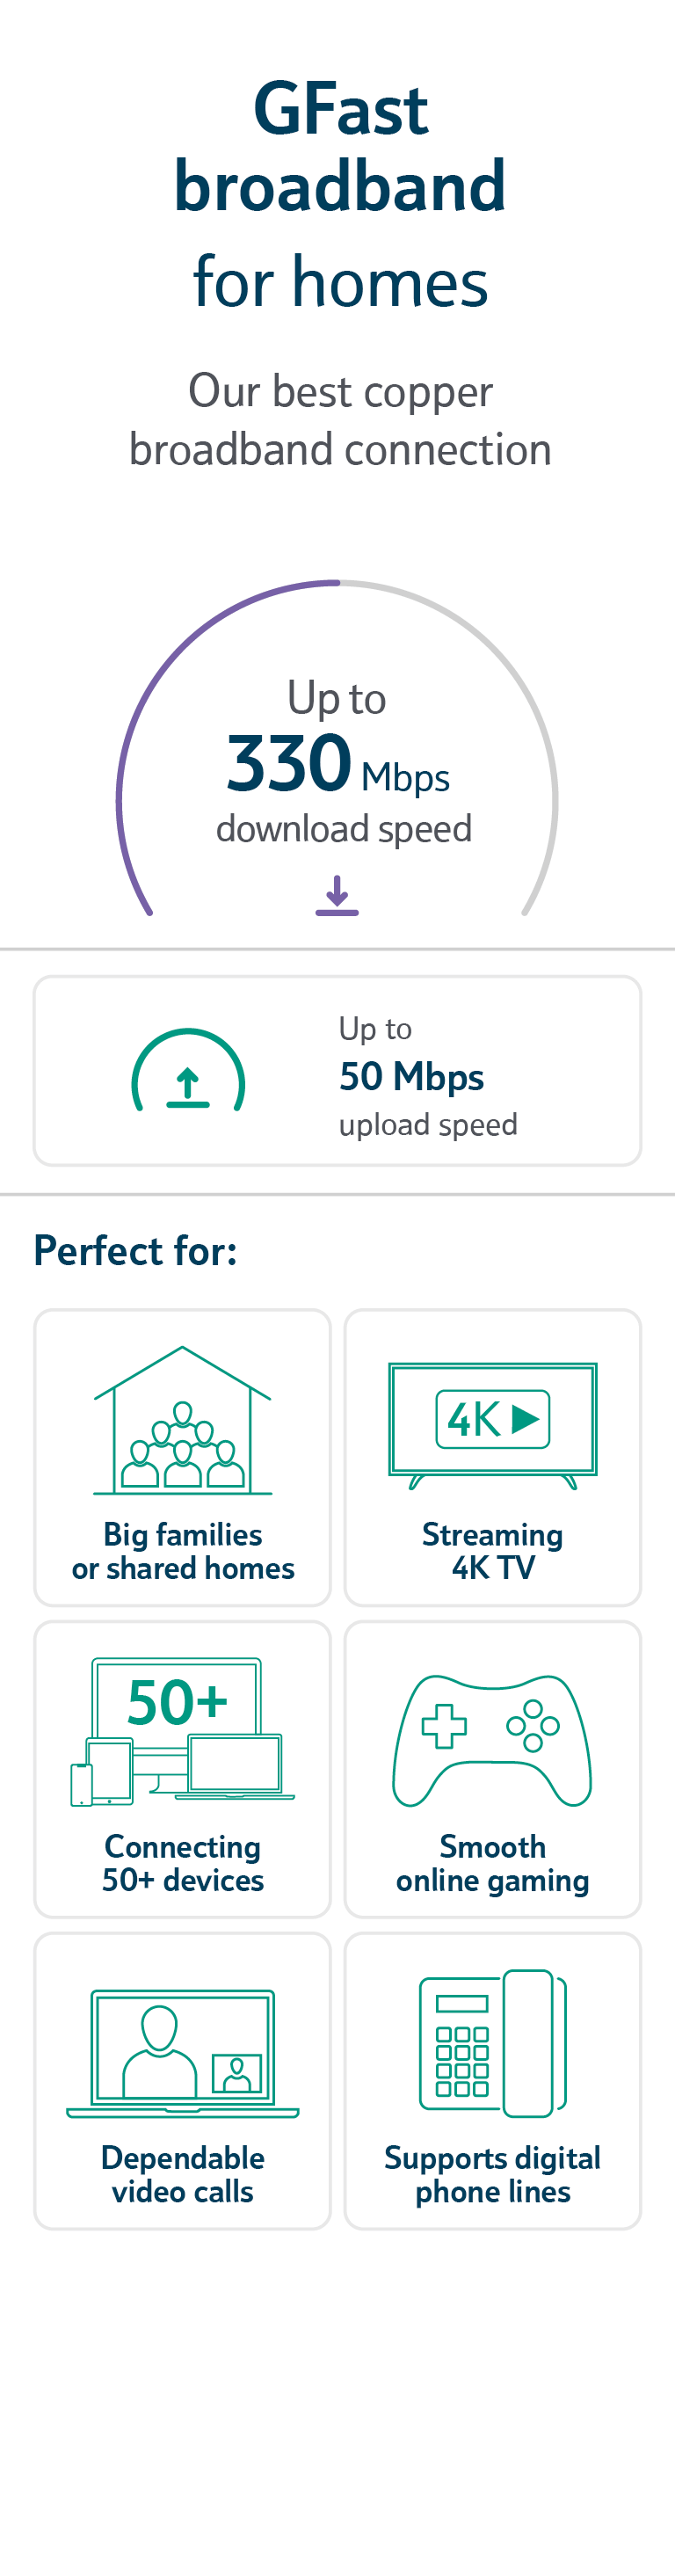 GFast broadband for homes comparison card with icons